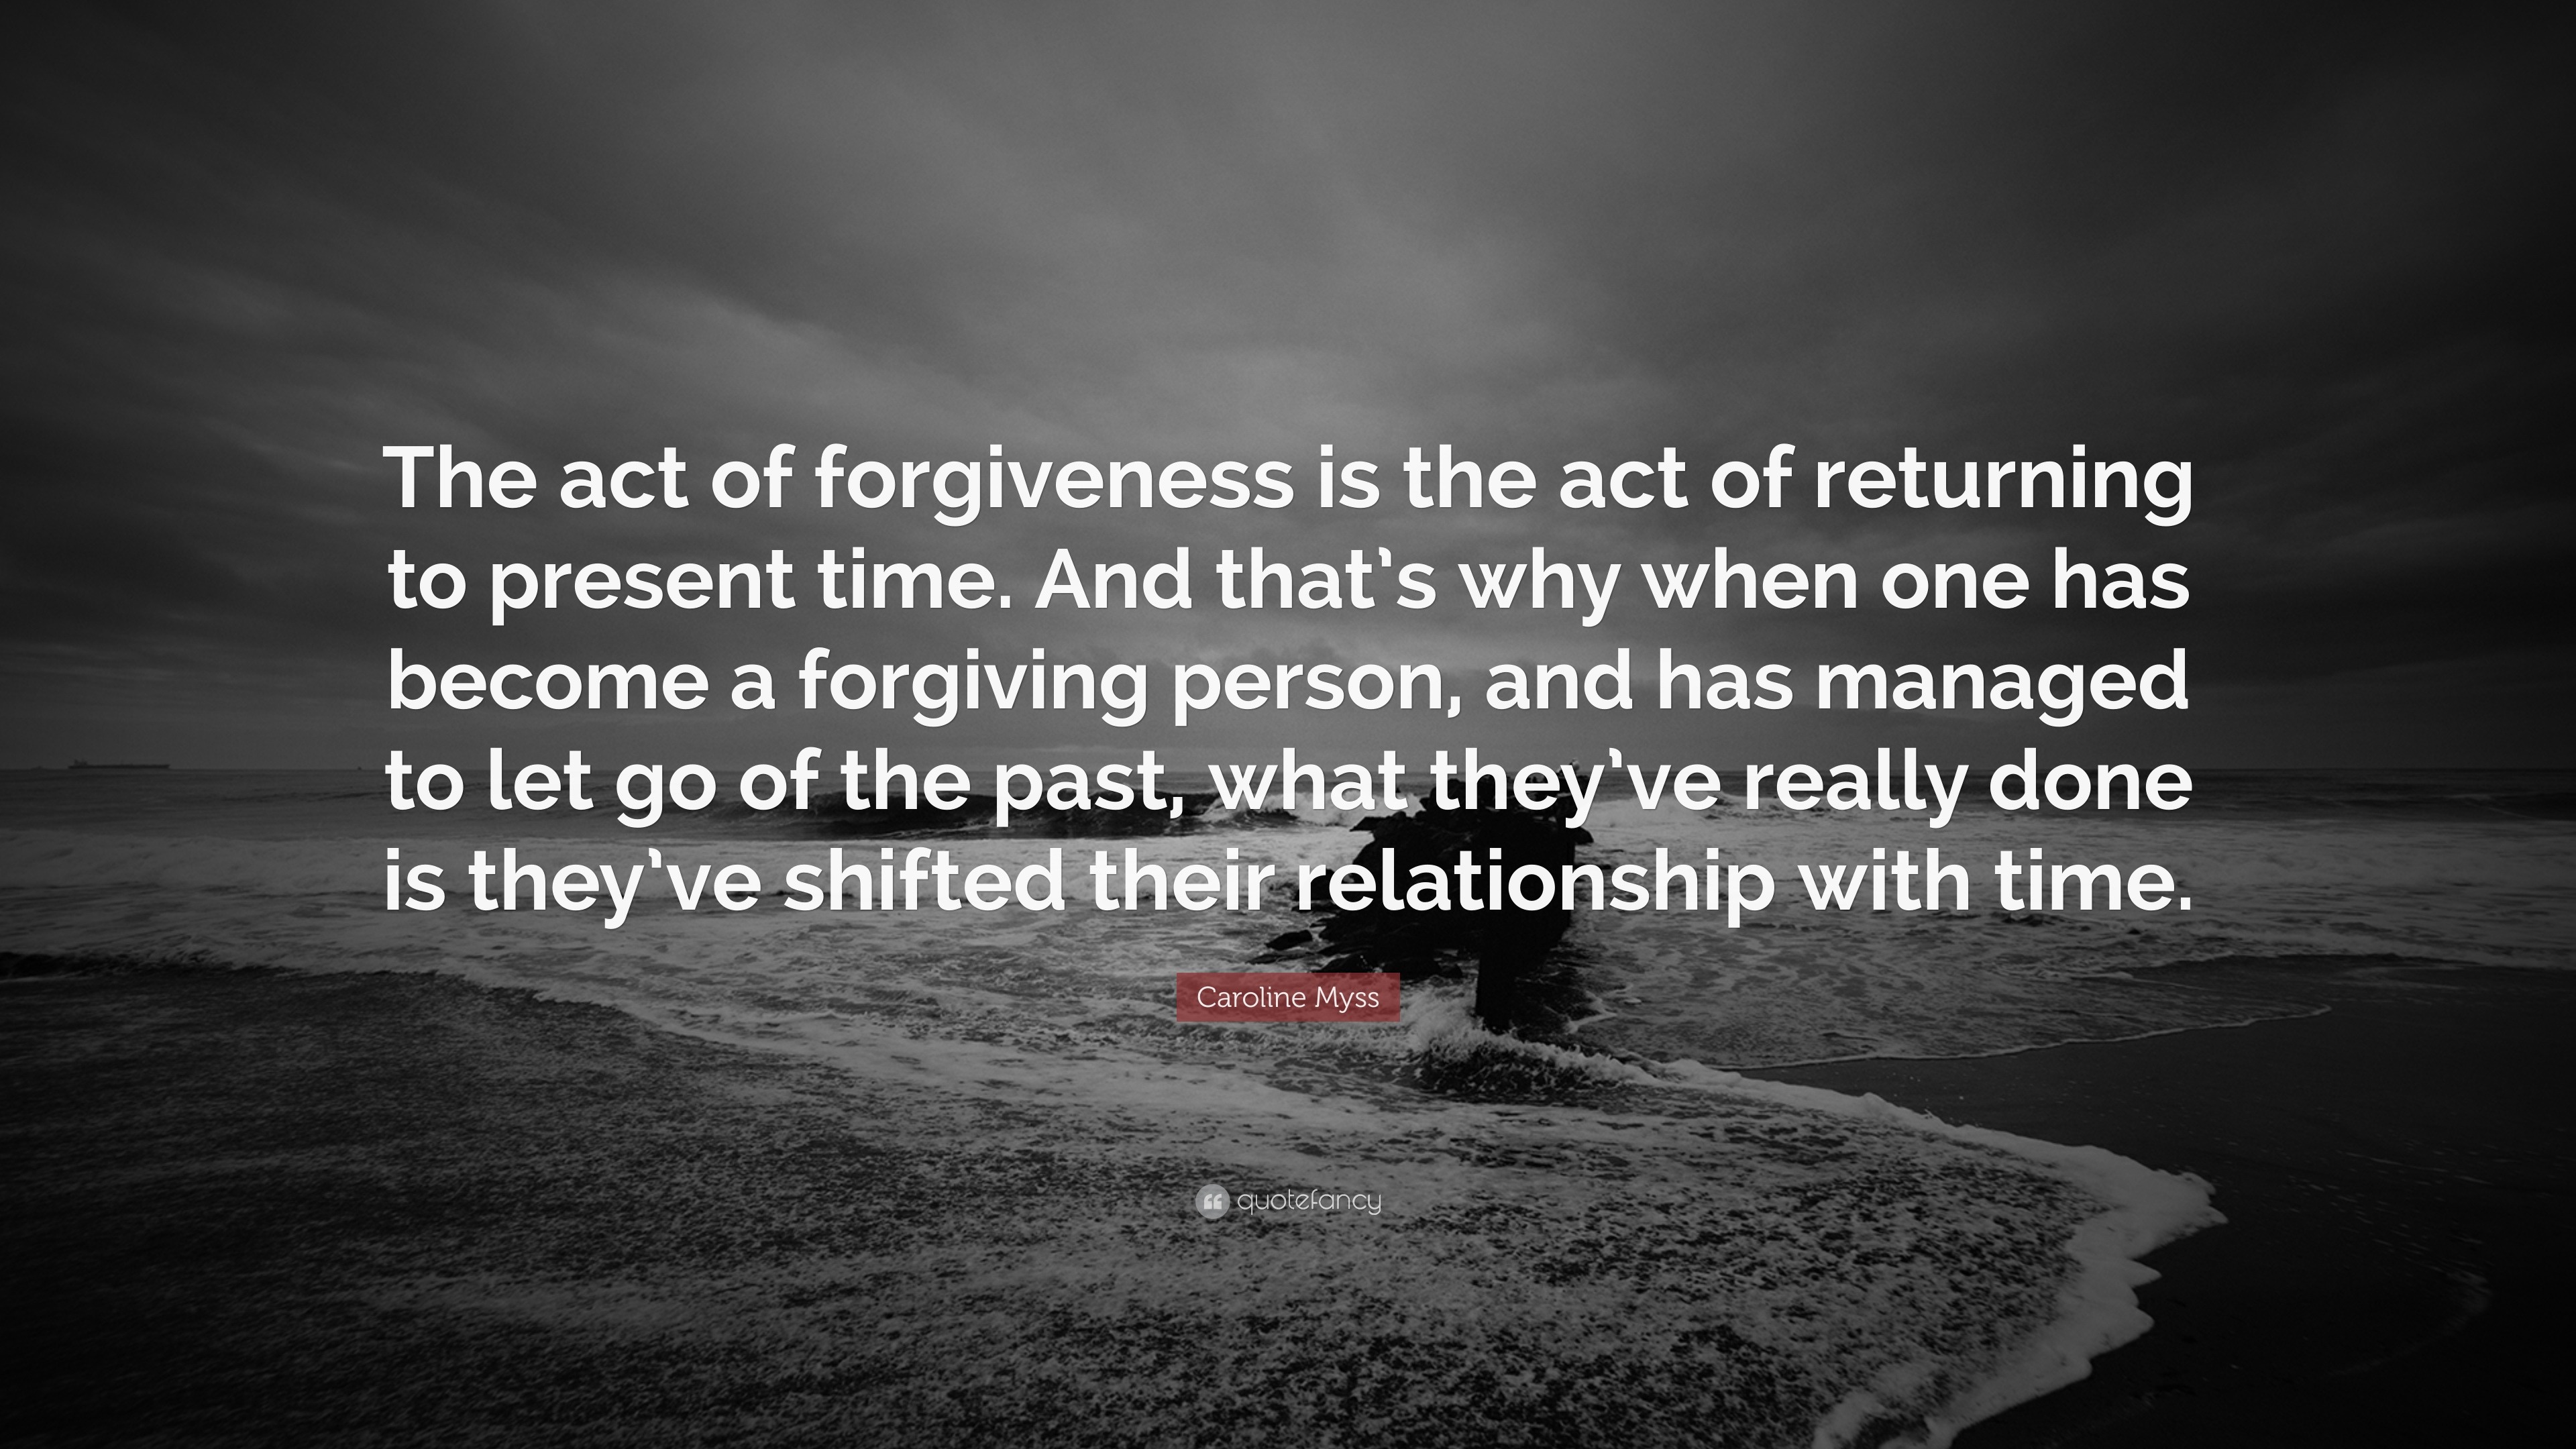 Broken Heart Quotes “The act of forgiveness is the act of returning to present